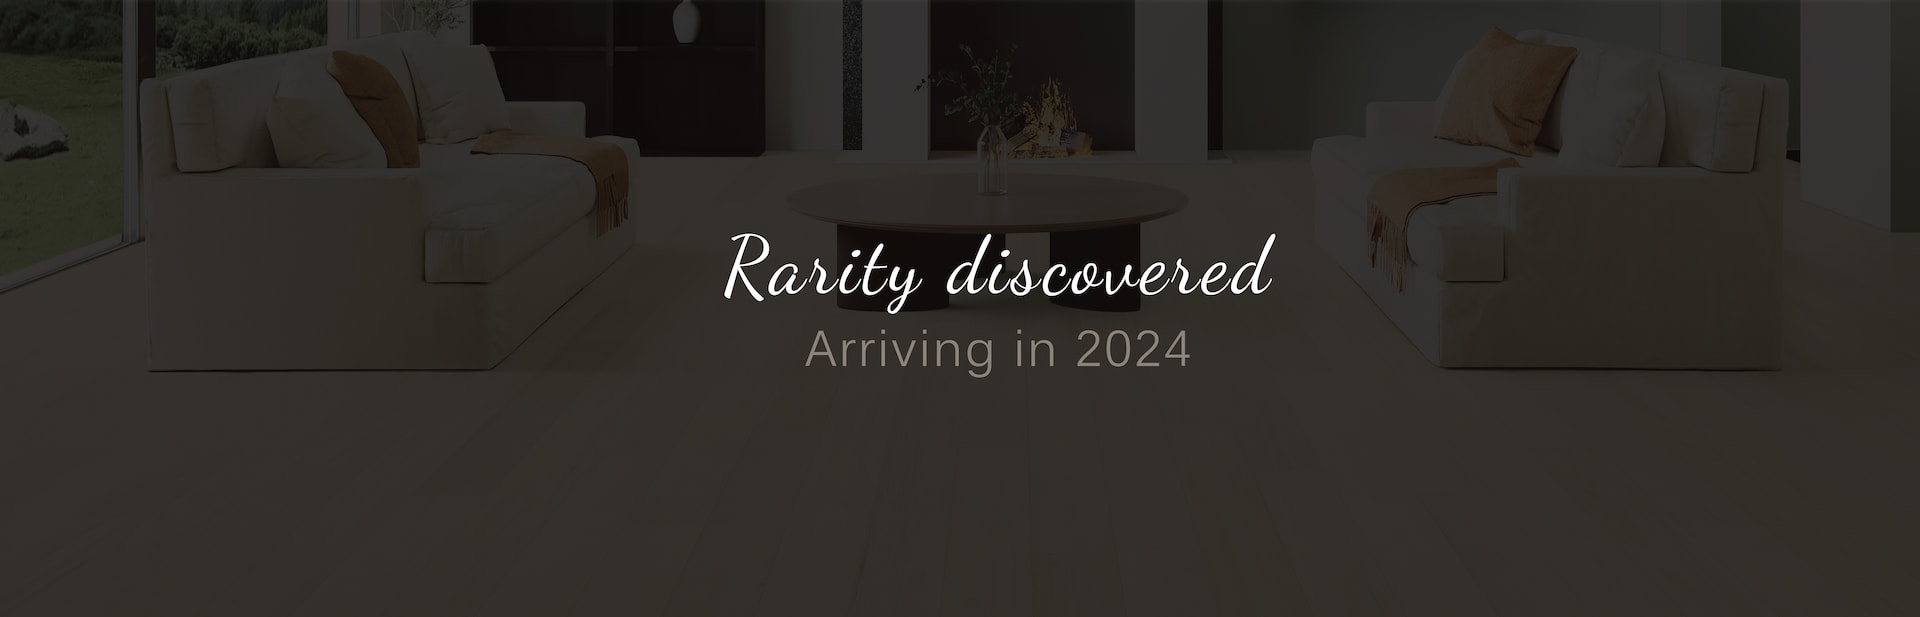 Rarity Discovered - Arriving in 2024